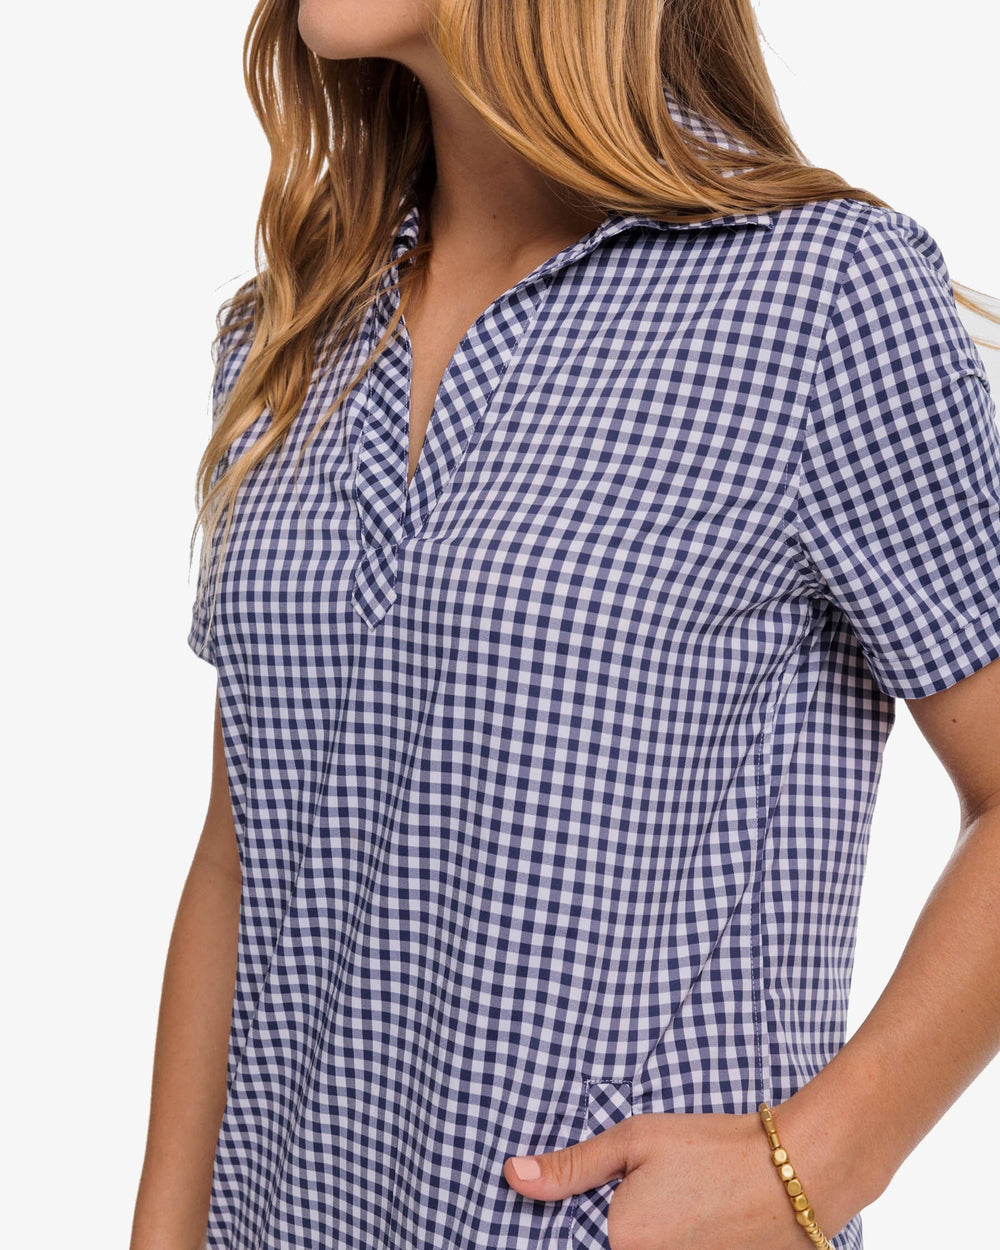 The detail view of the Southern Tide Kamryn brrr°® Intercoastal Gingham Dress by Southern Tide - Nautical Navy